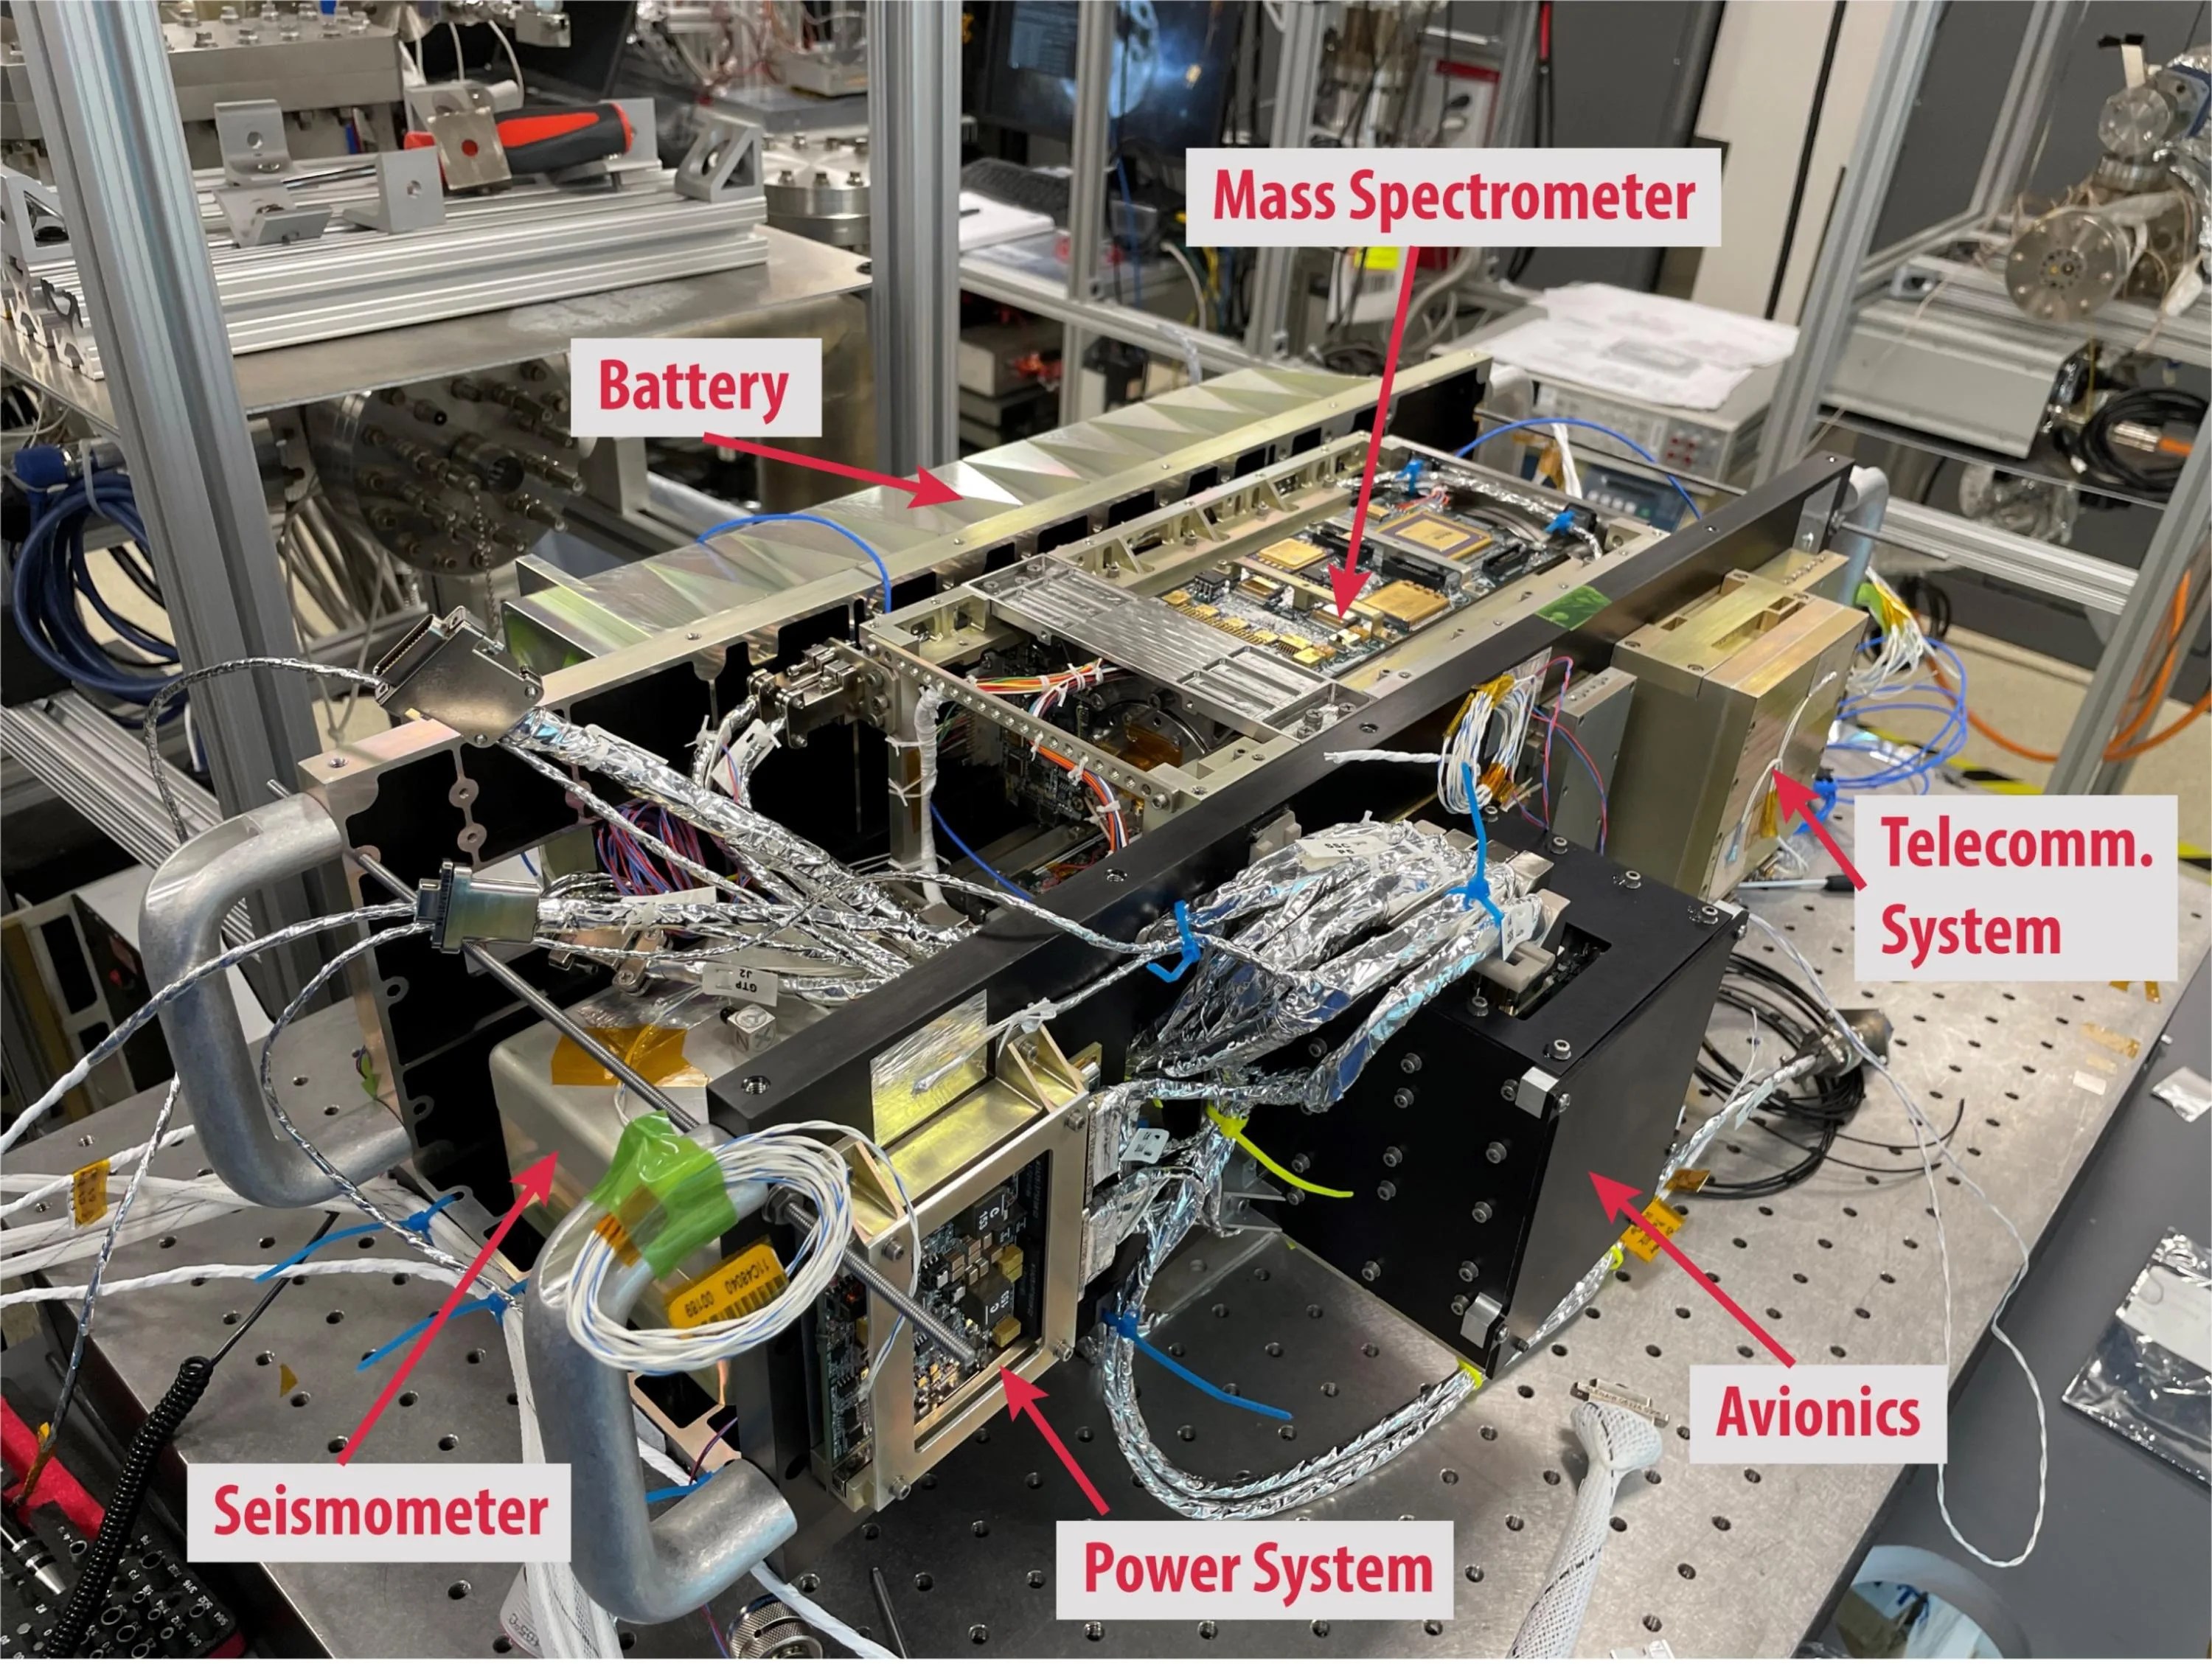 Photo of the inside of the LEMS engineering unit with labels pointing to the batter, mass spectrometer, telecomm system, avionics, power system and seismometer